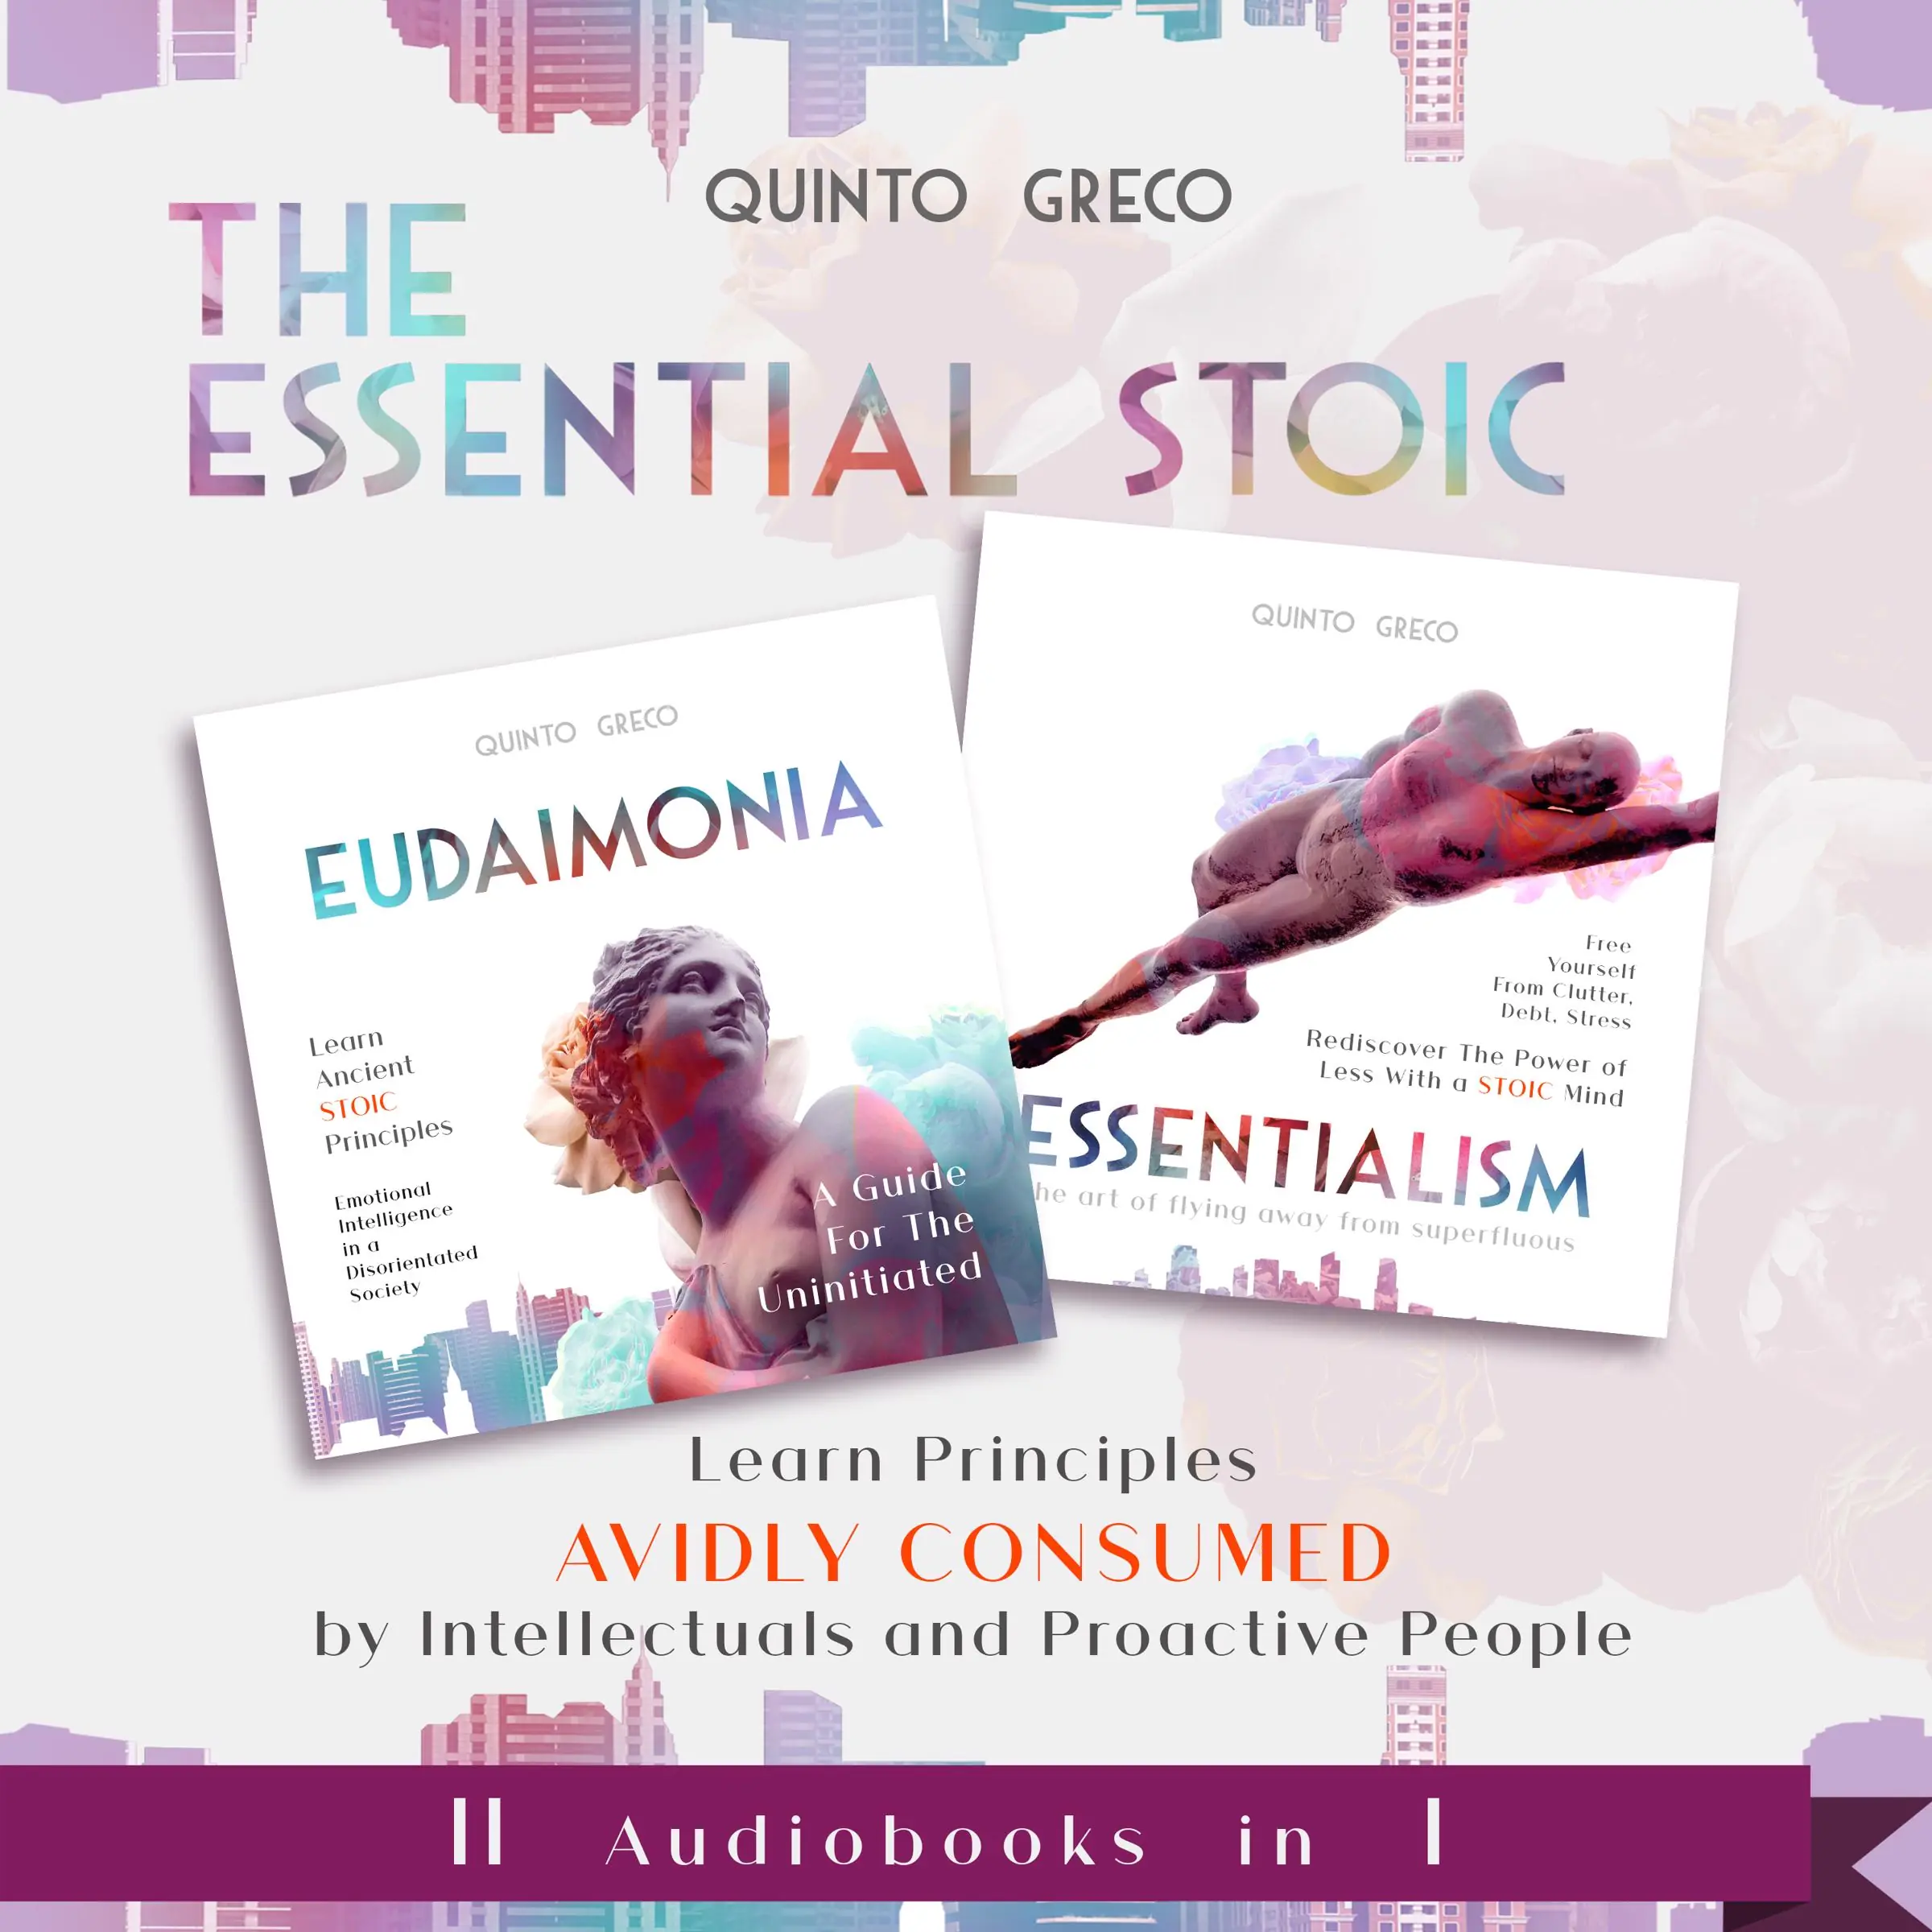 Essential Stoic: Eudaimonia & Essentialism (II in I) Audiobook by Quinto Greco